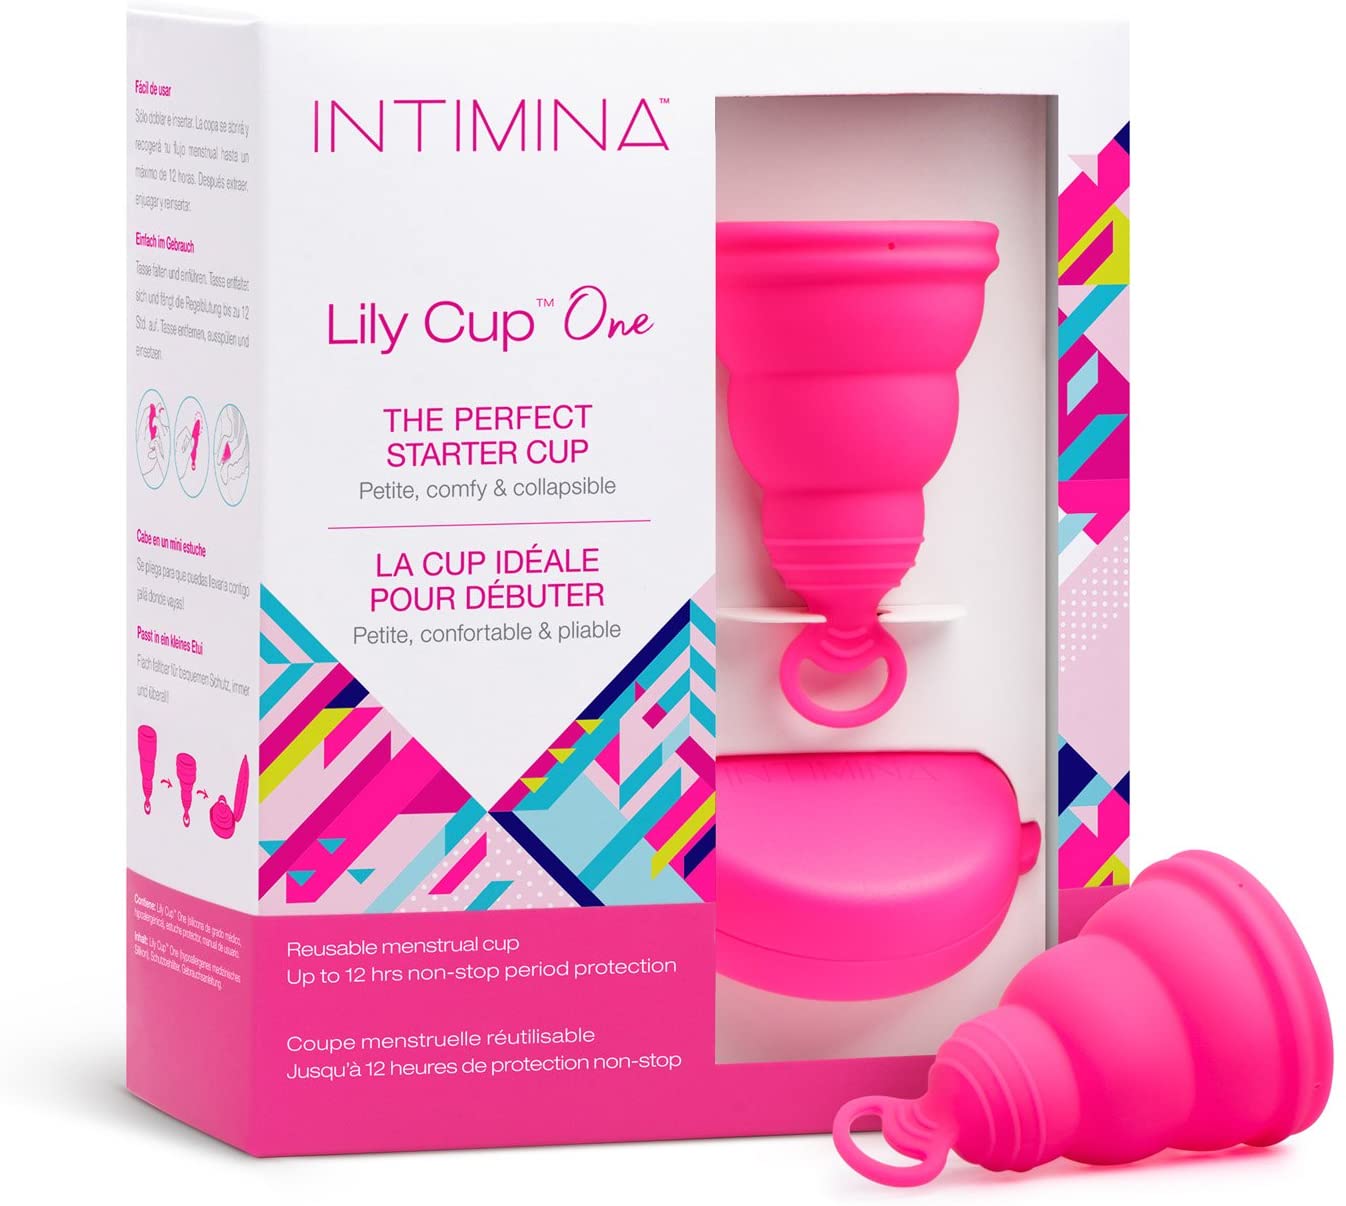 Lily Cup One The Perfect Menstrual Cup Starter #6065 - Intimina Available at Online Family Pharmacy Qatar Doha